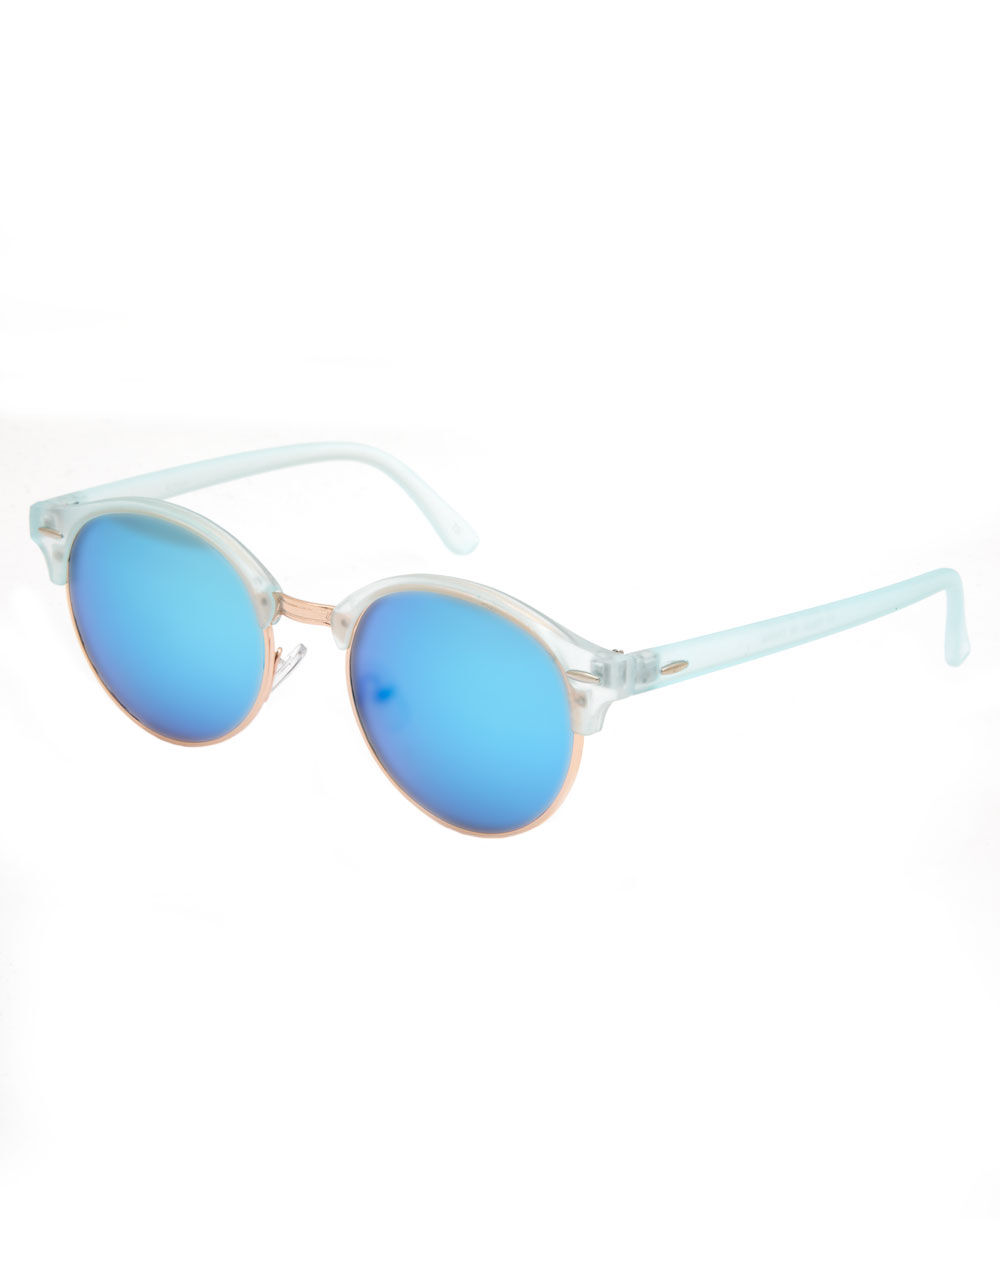 BLUE CROWN Revo Clubmaster Sunglasses image number 0